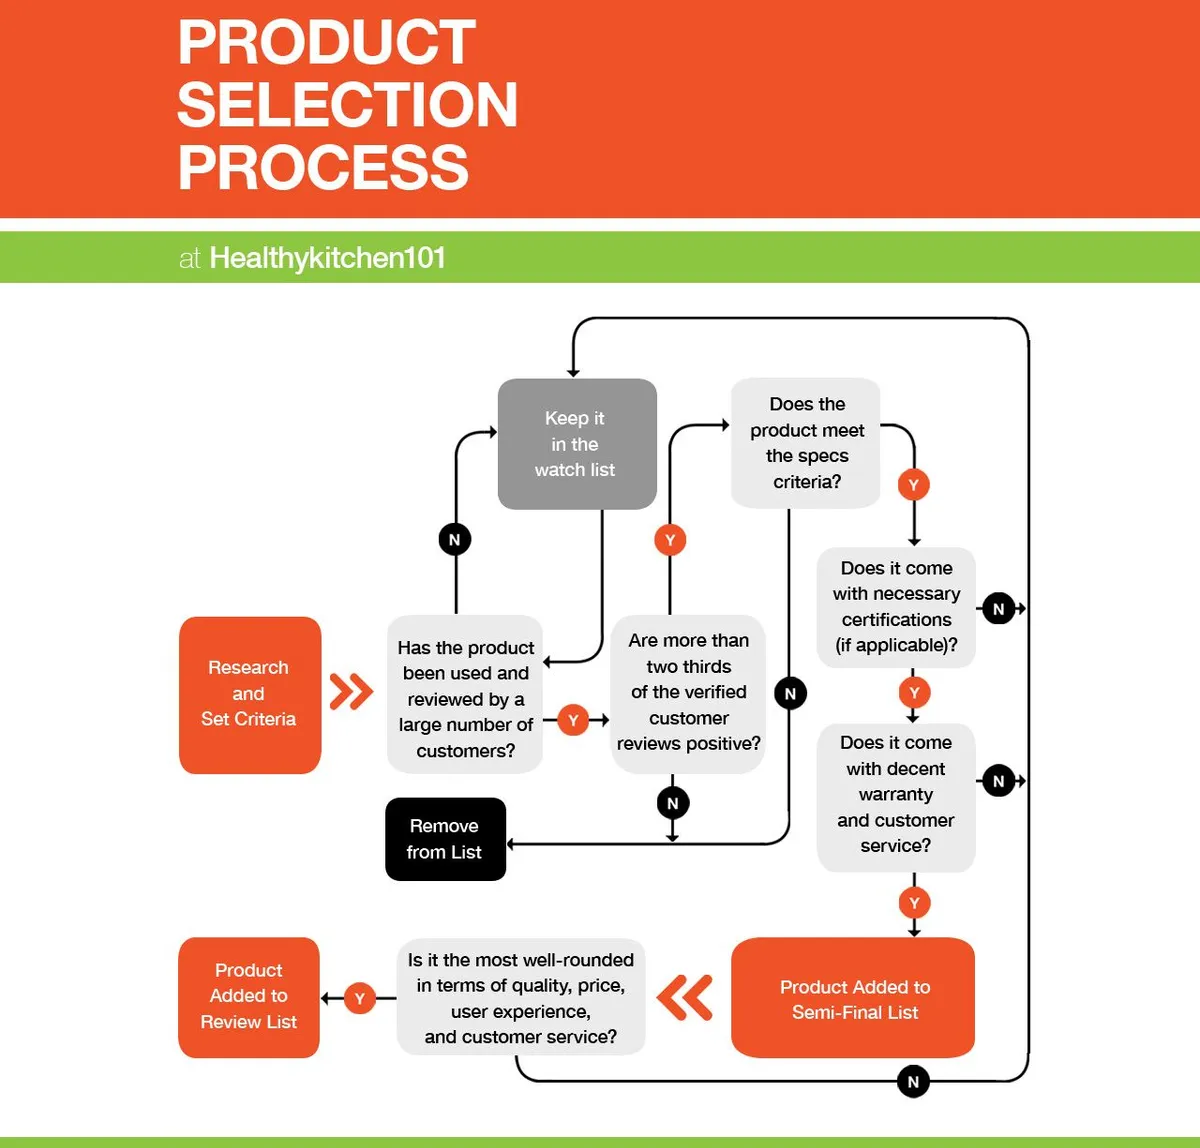 The Product Selection Process